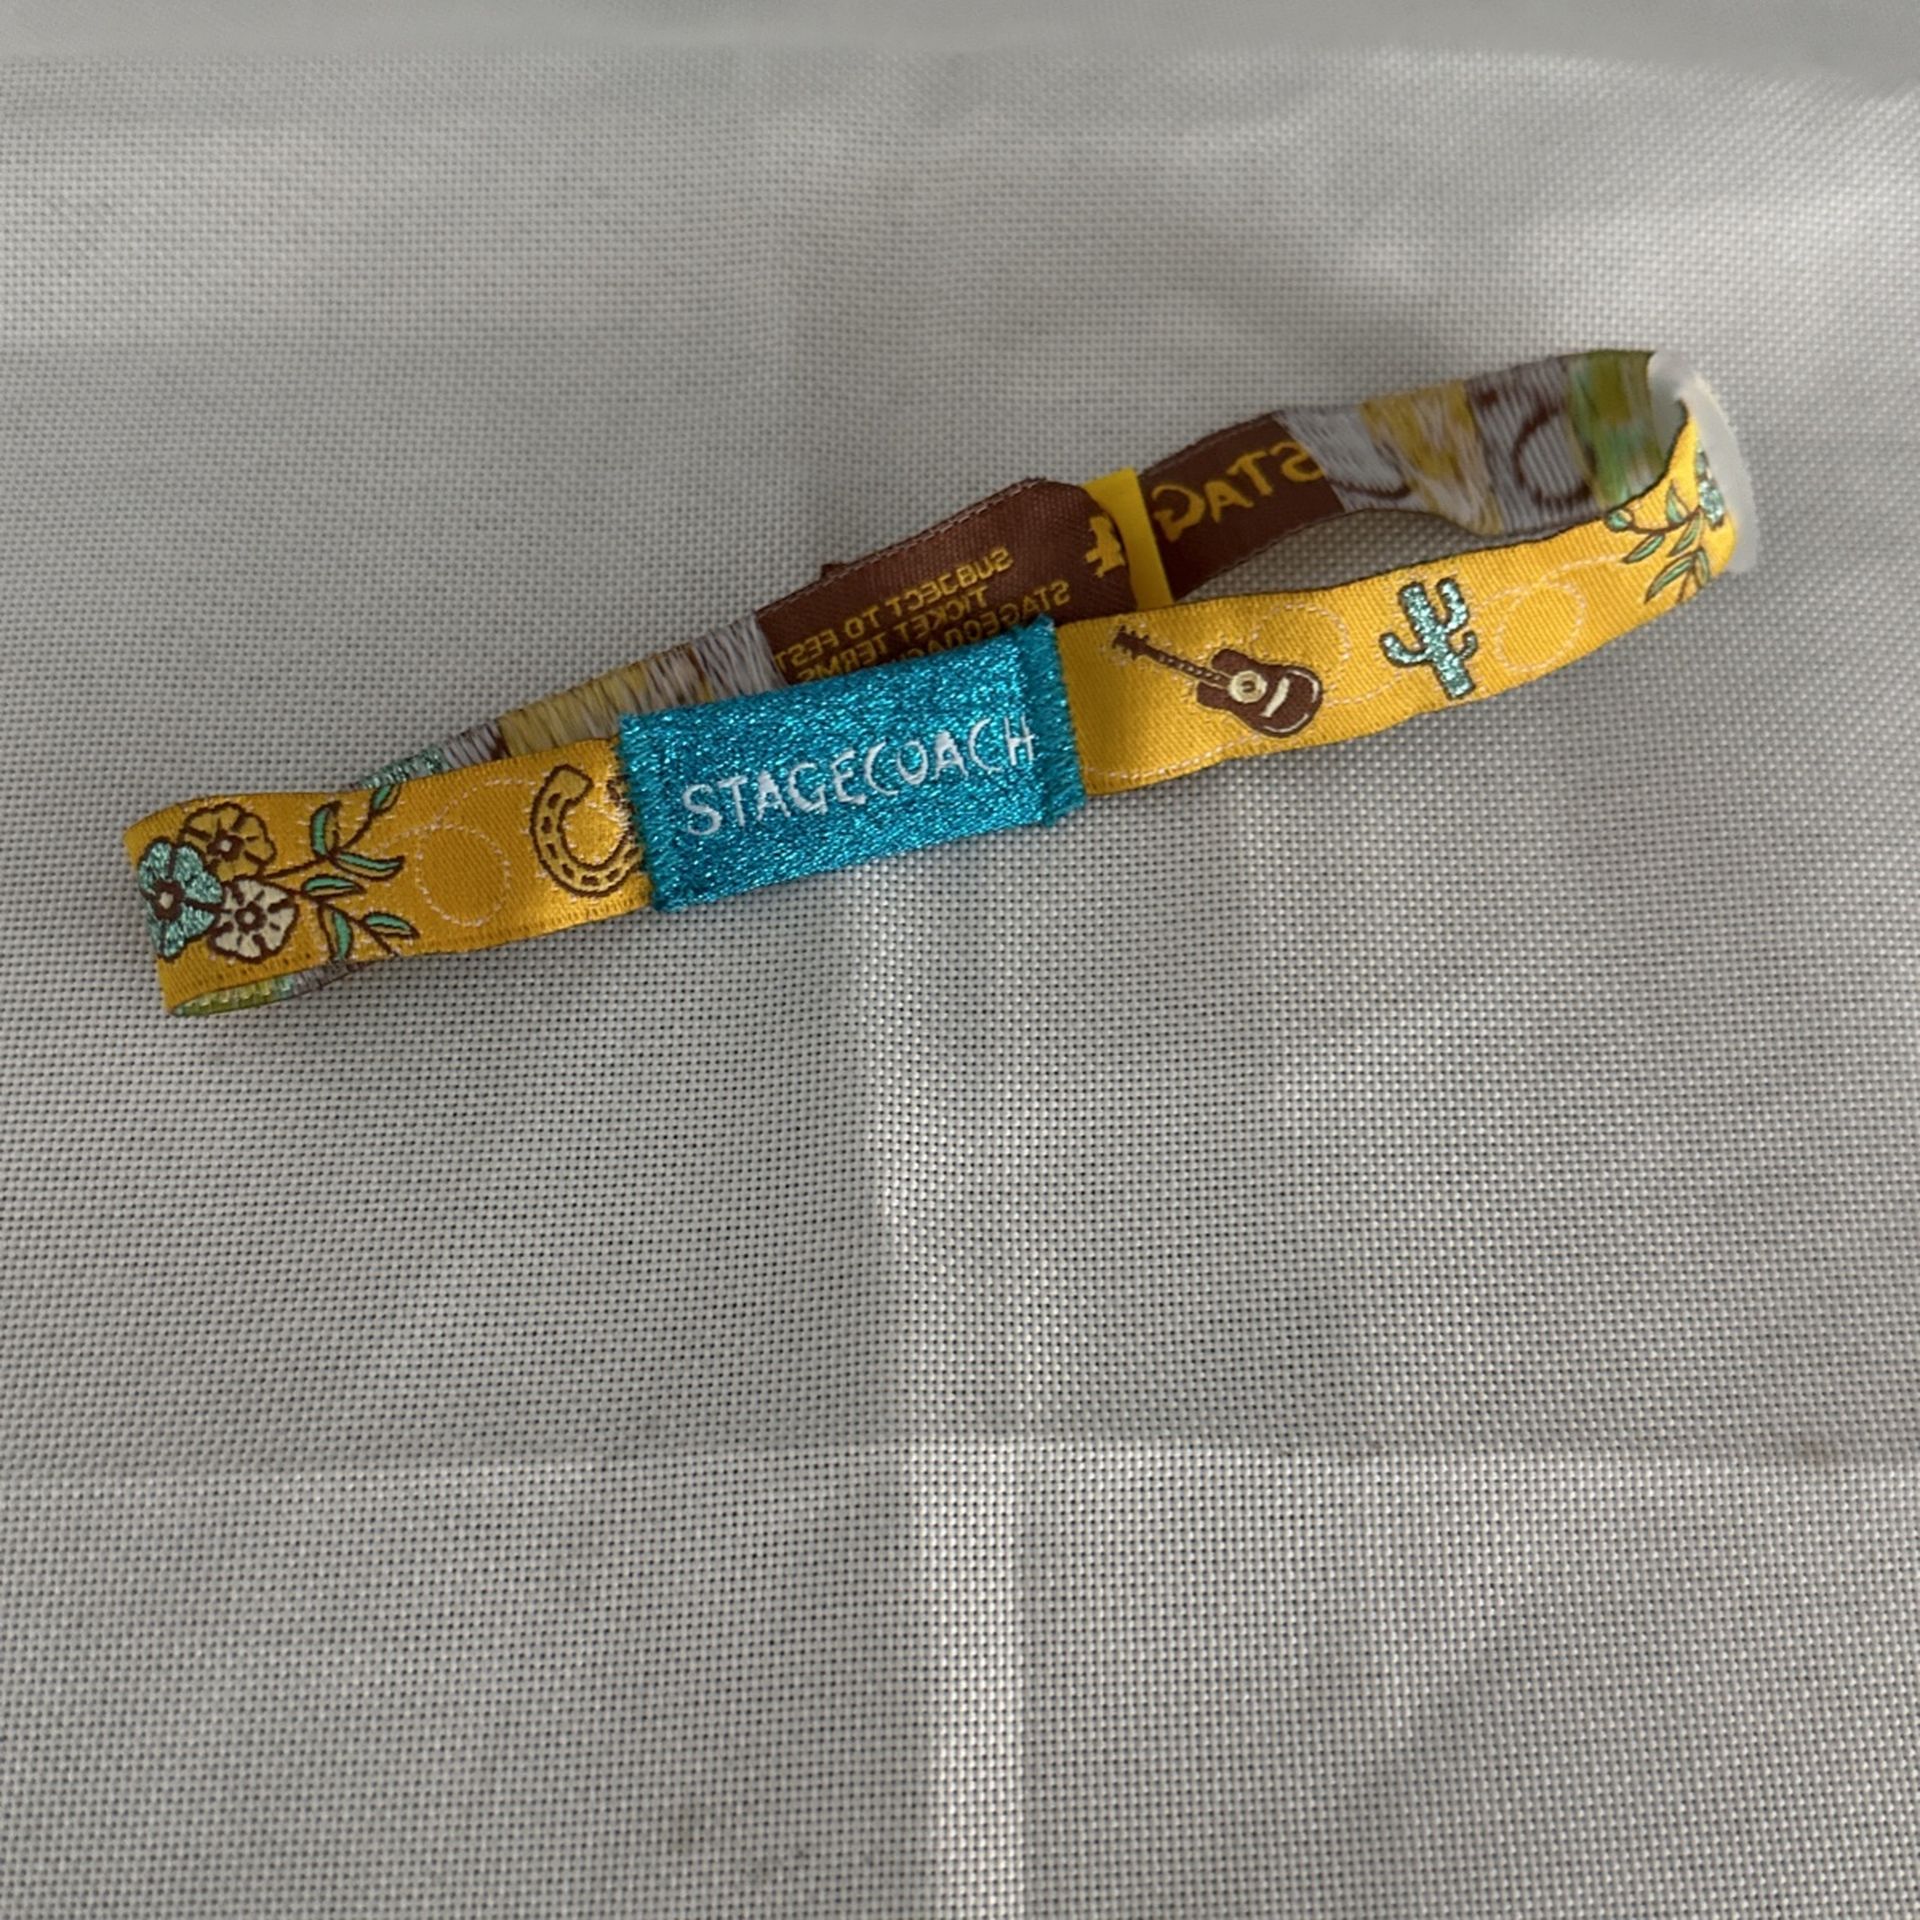 Stagecoach Festival Wristband for Sale - $450